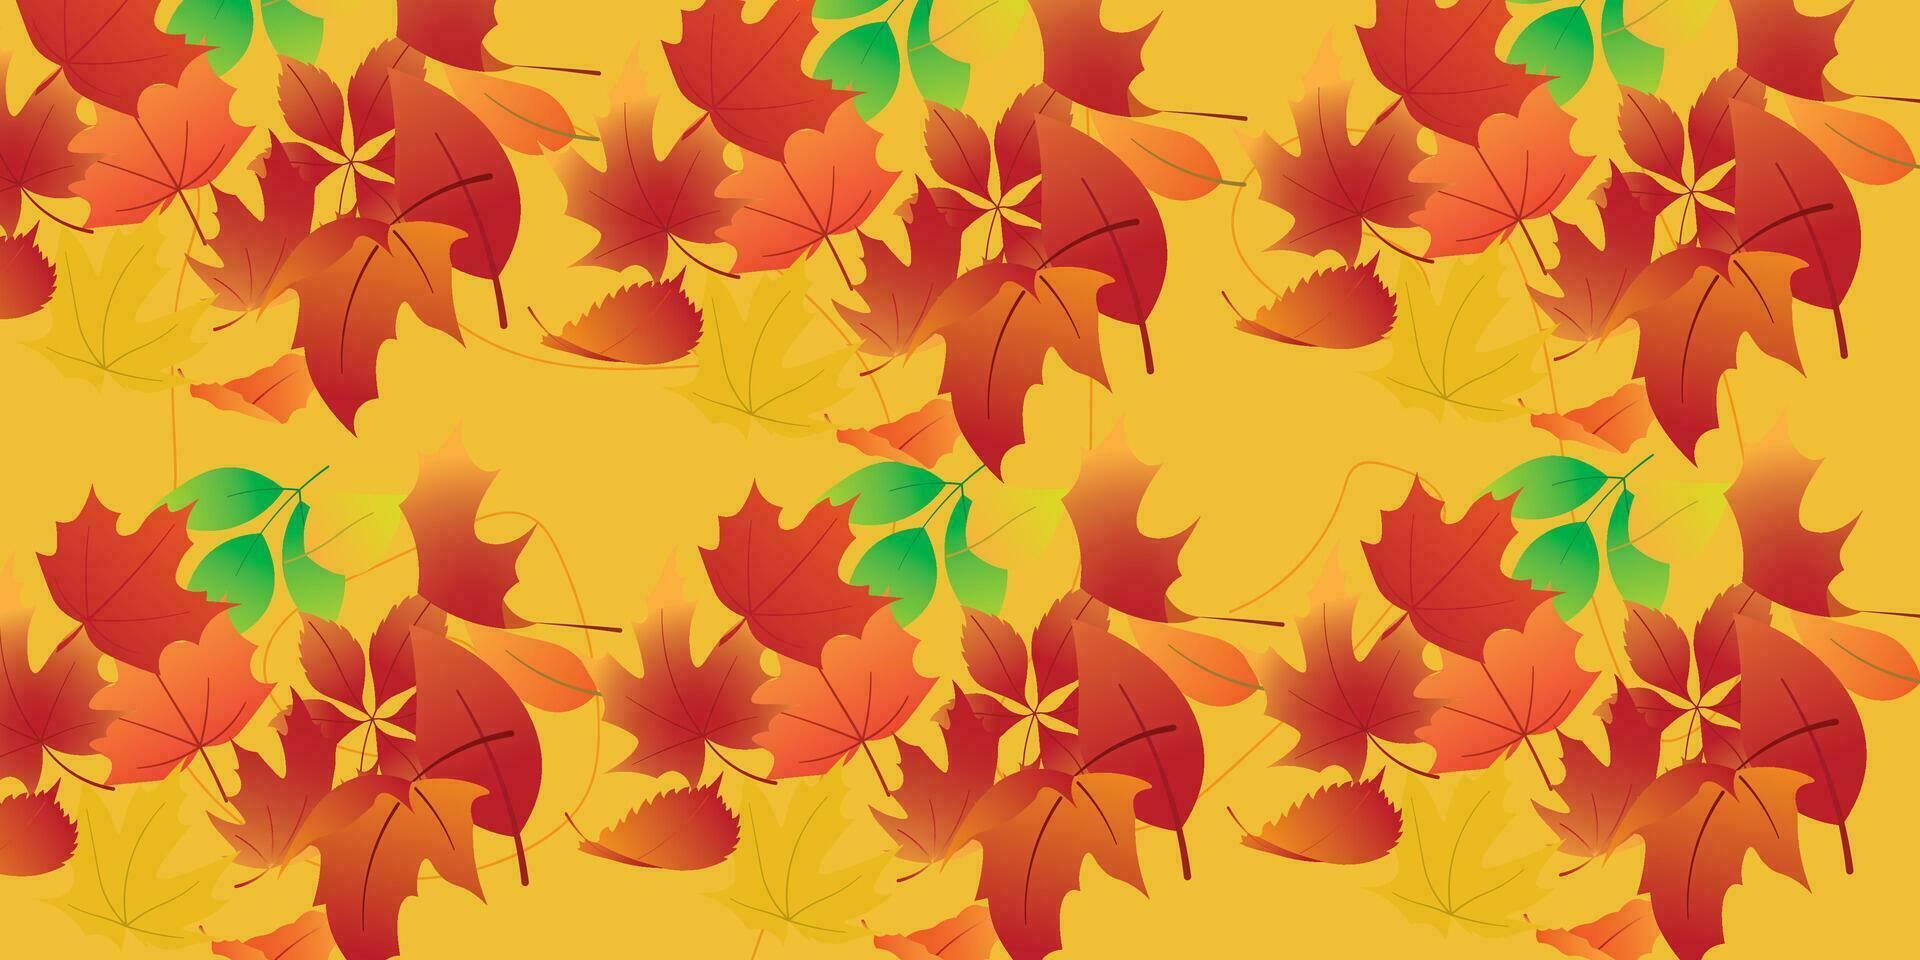 Background design with autumn theme vector